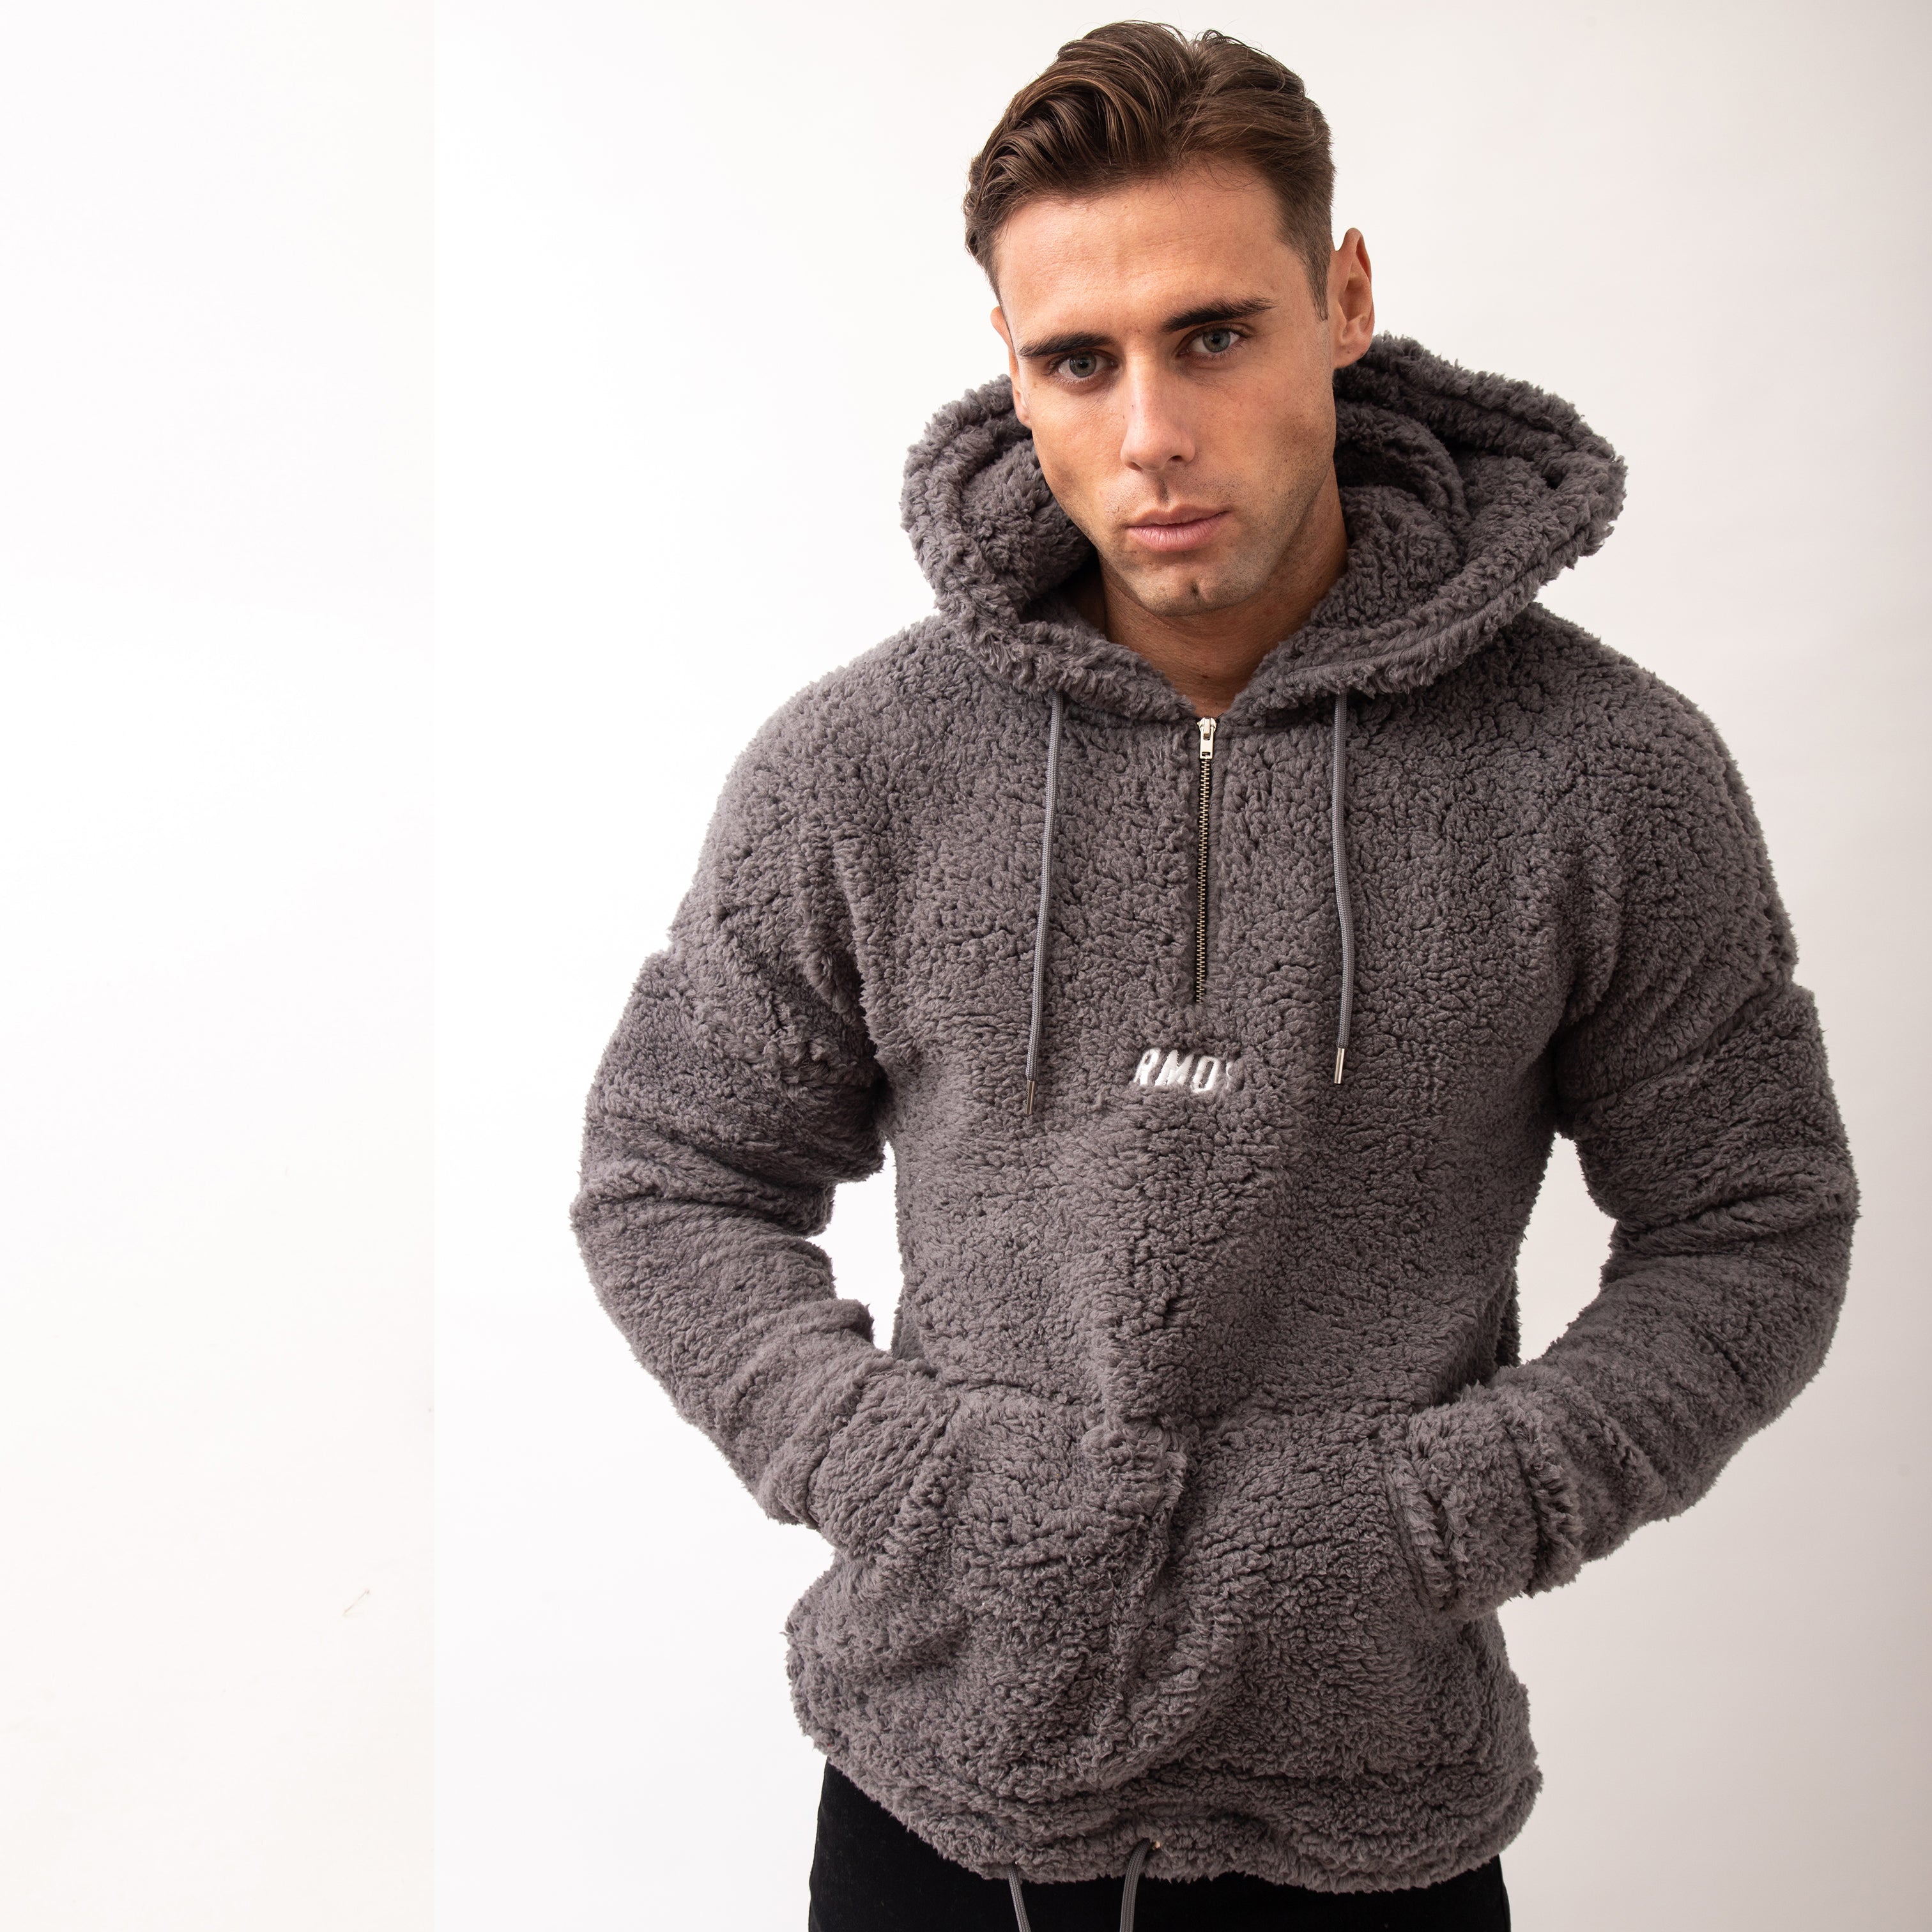 THE COMFY HOODIE YOUR WINTER WARDROBE NEEDS.